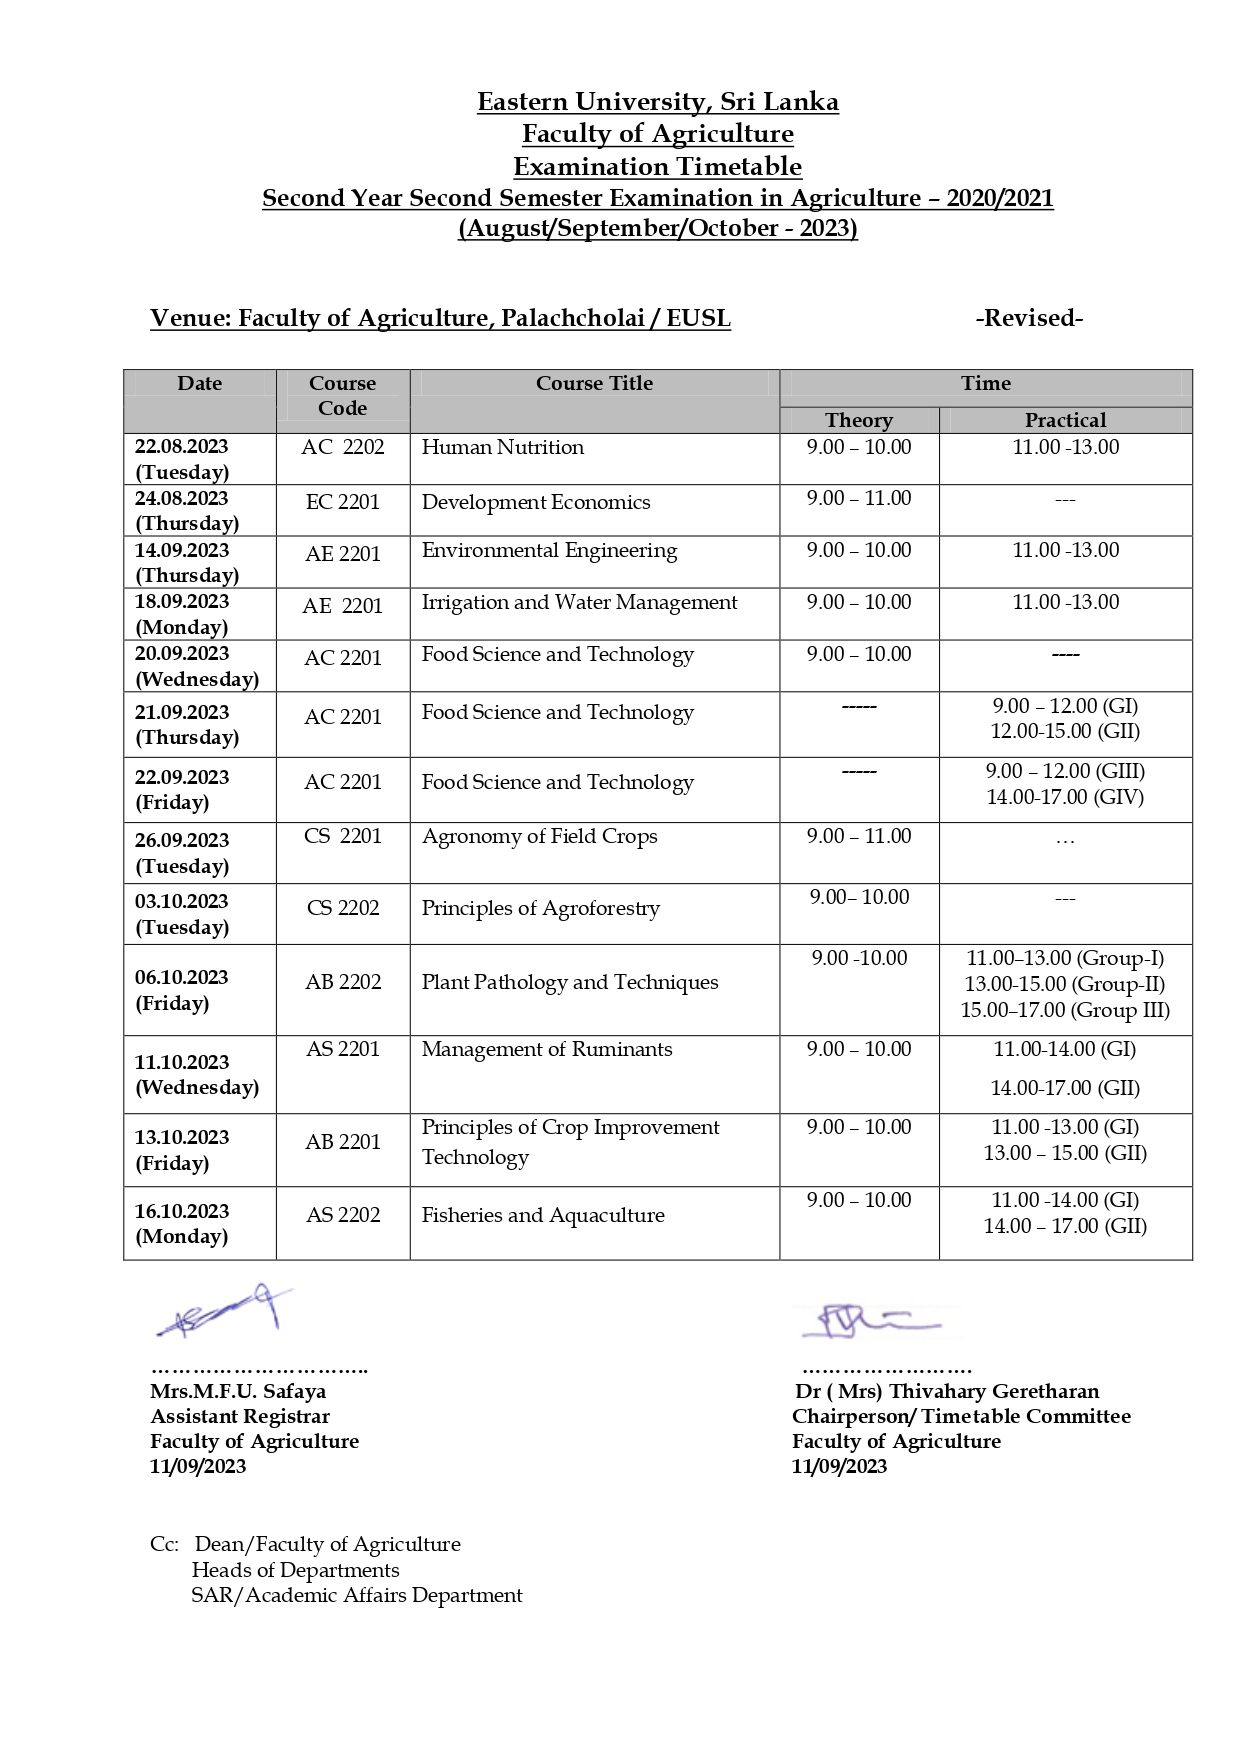  Exam Timetable_Second Year Second Semetser_ 202021_Revised_page-0001.jpg